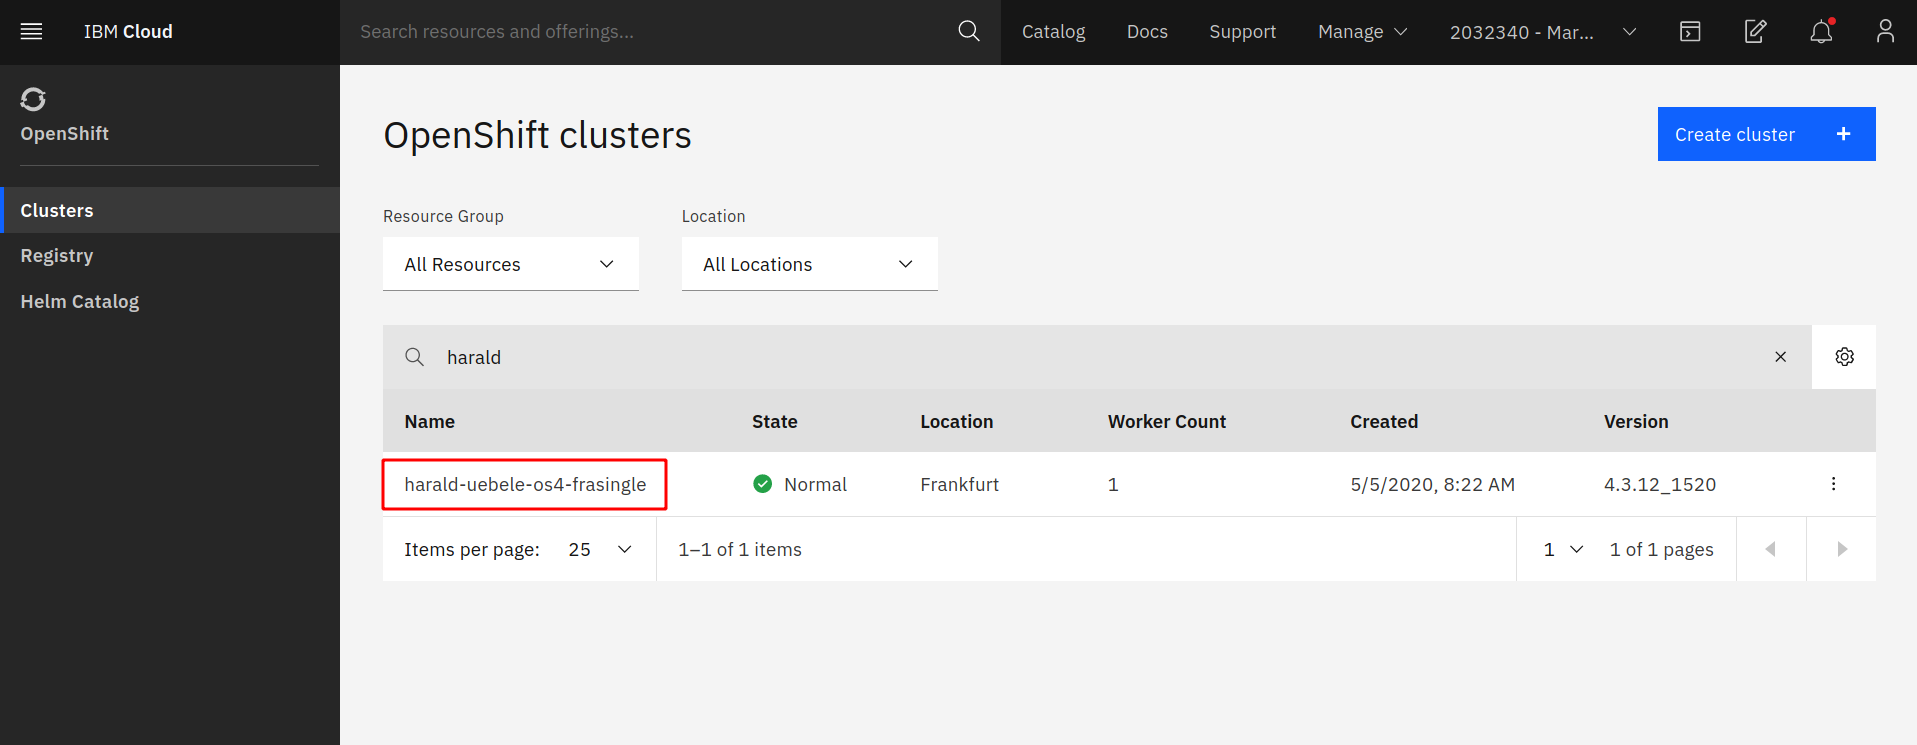 Chose Clusters and click on your OpenShift cluster